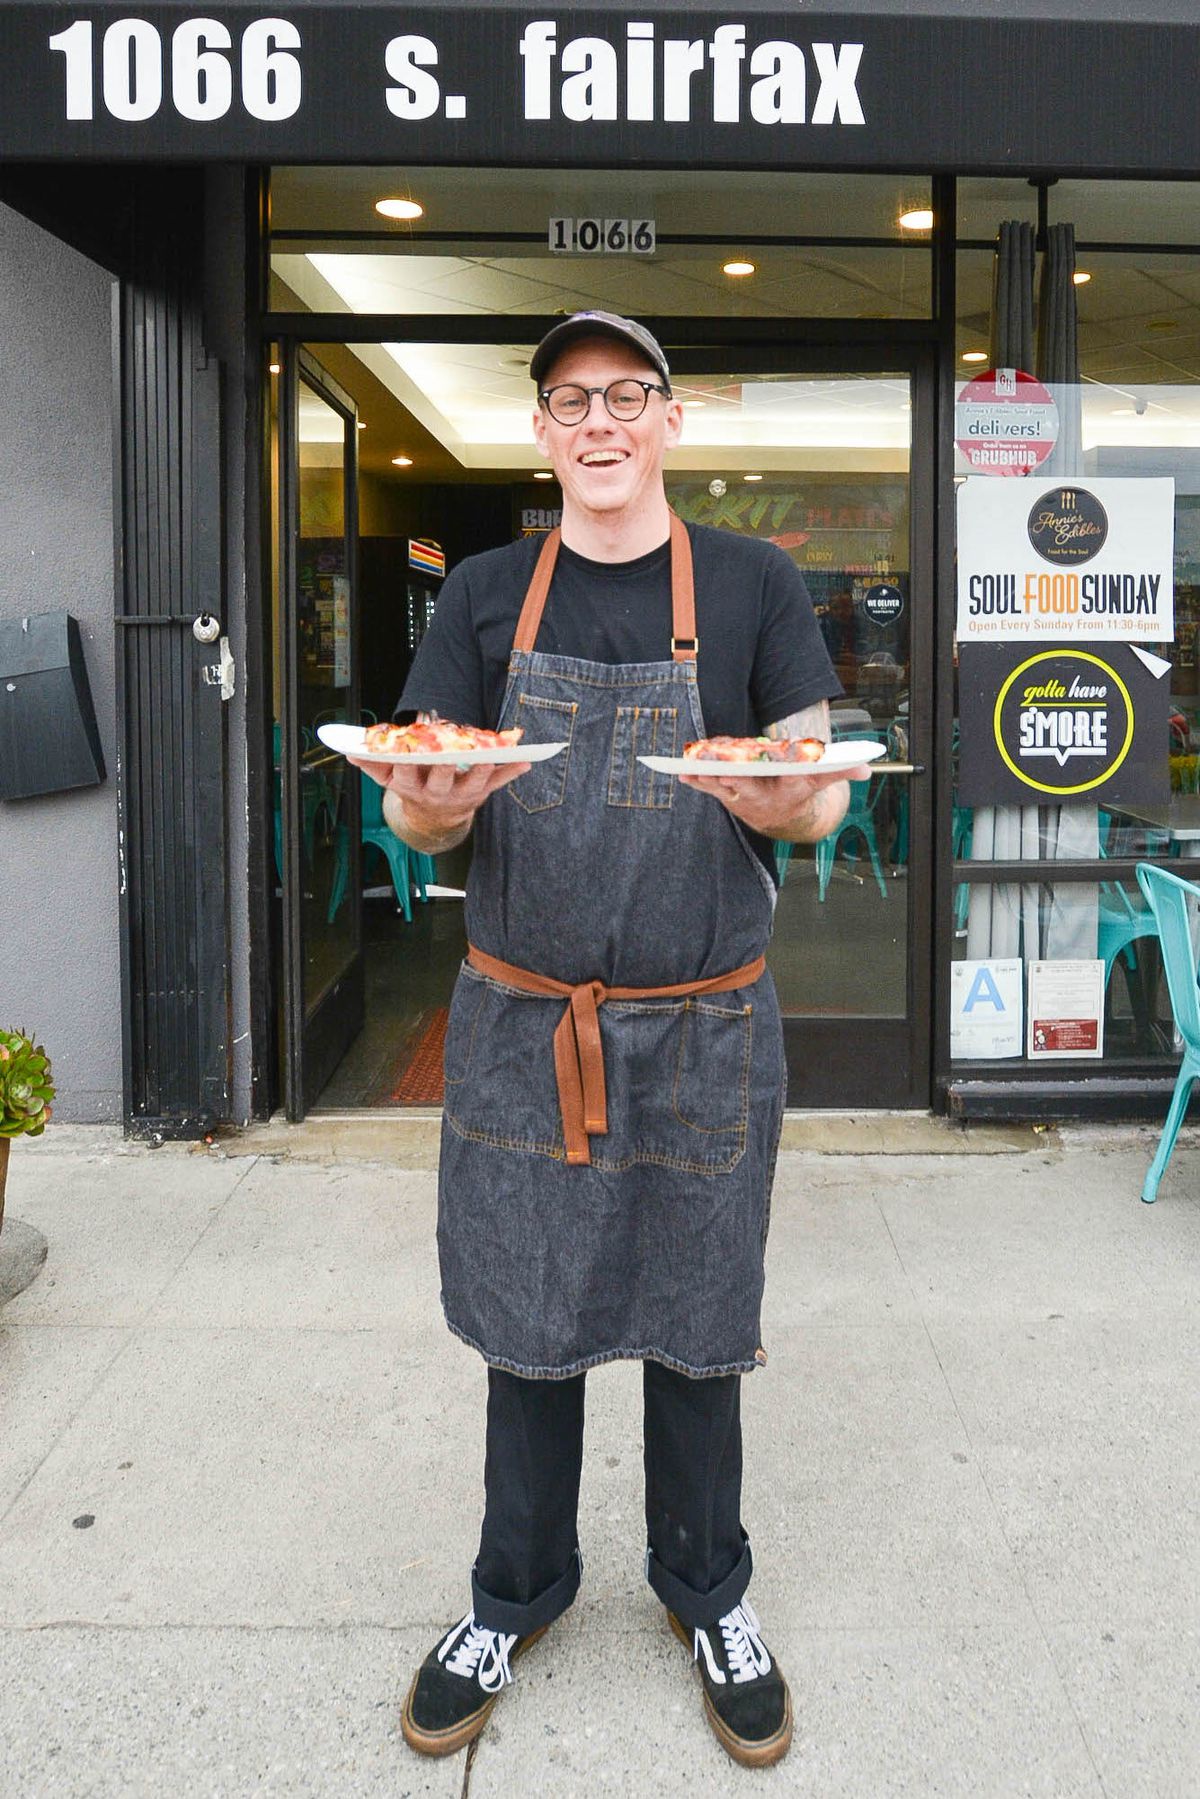 A man in a grey apron holds two slices of pizza on white paper plates in front of a restaurant.